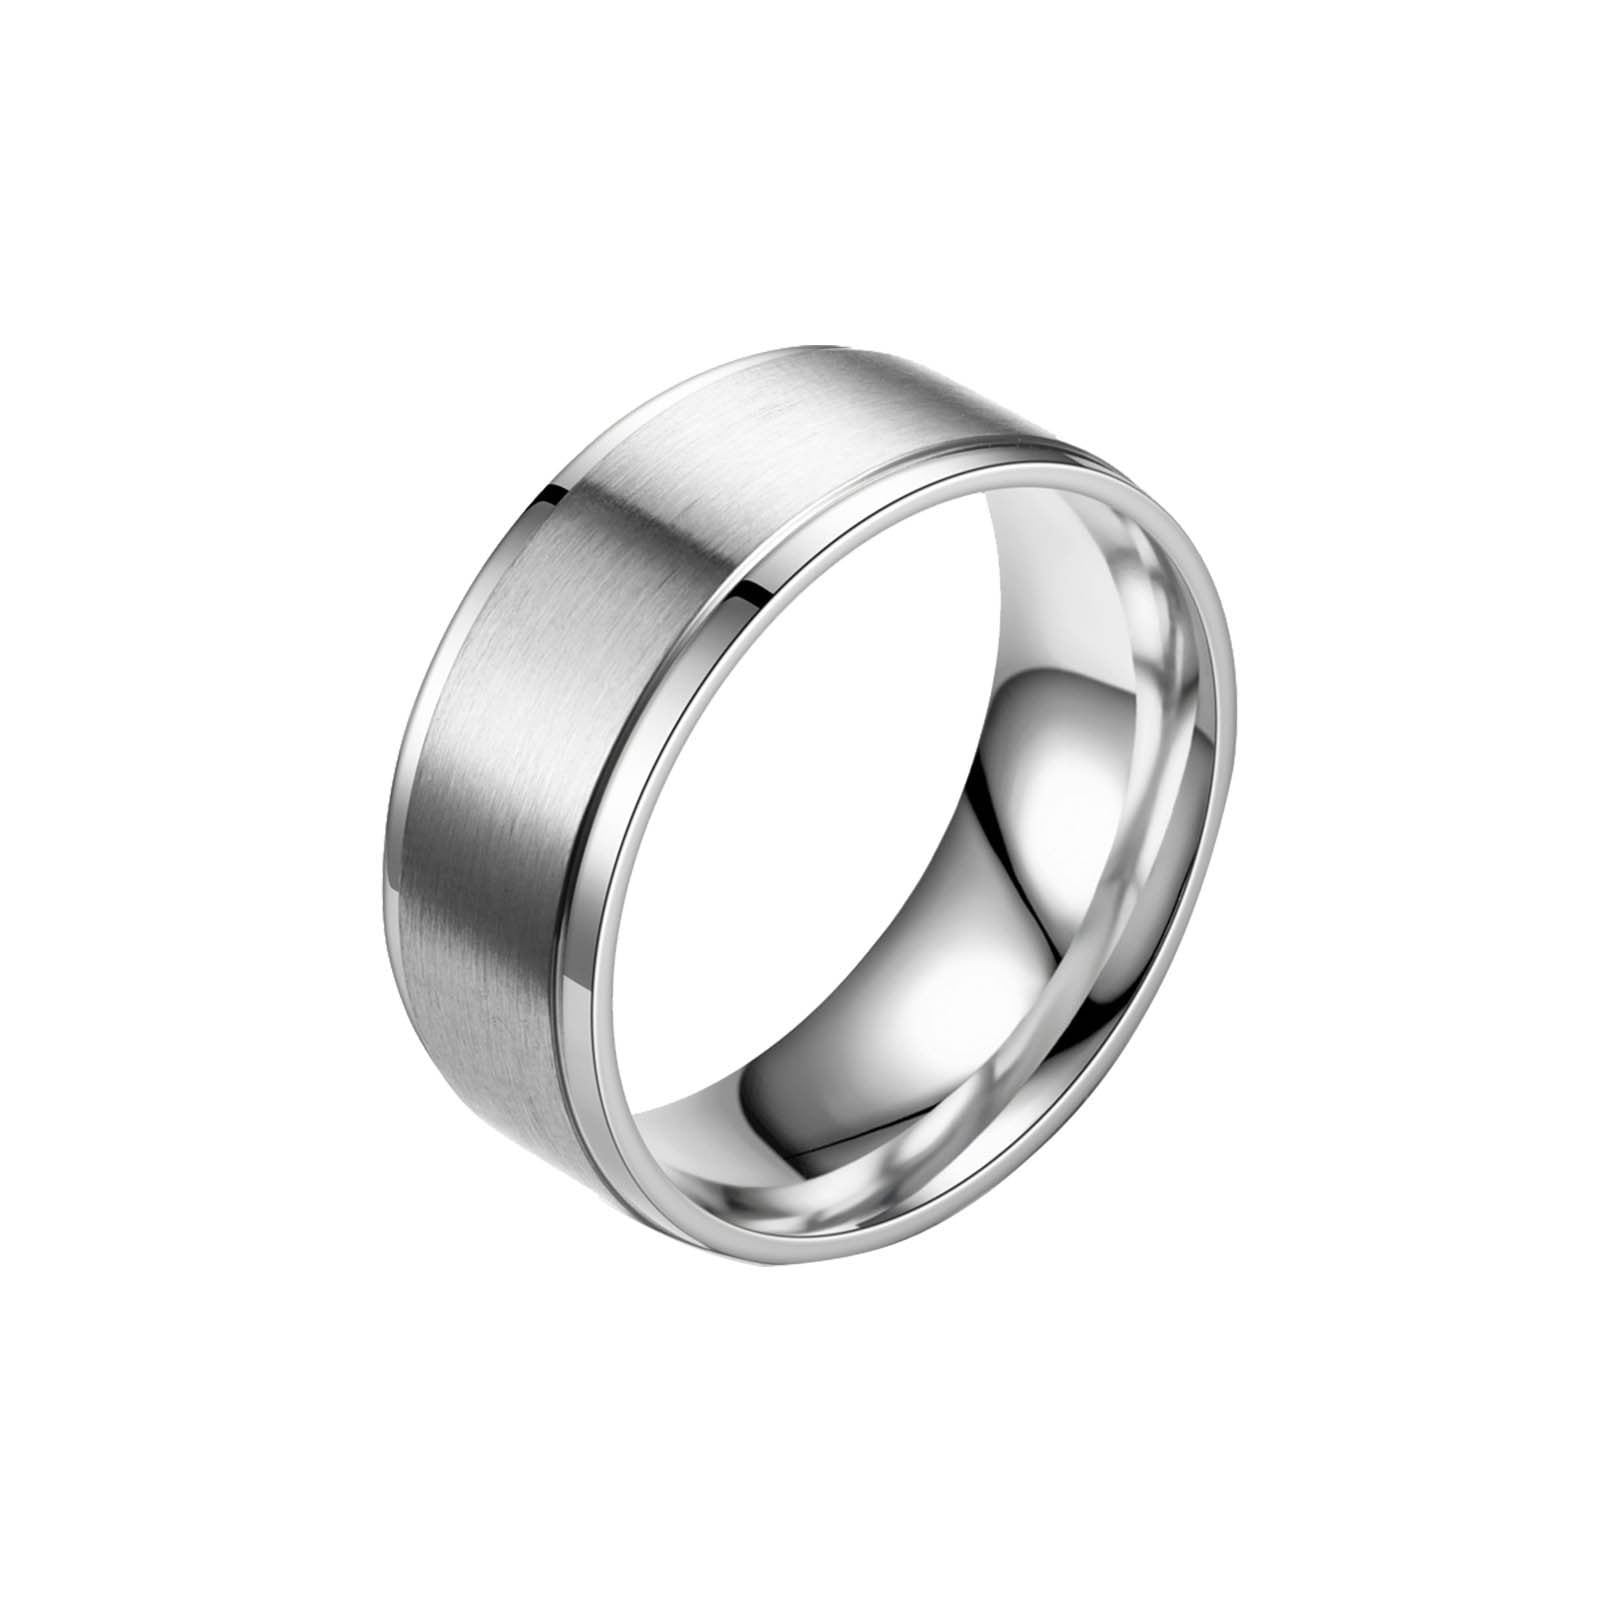 Stainless Steel Partt Ring Jewelry